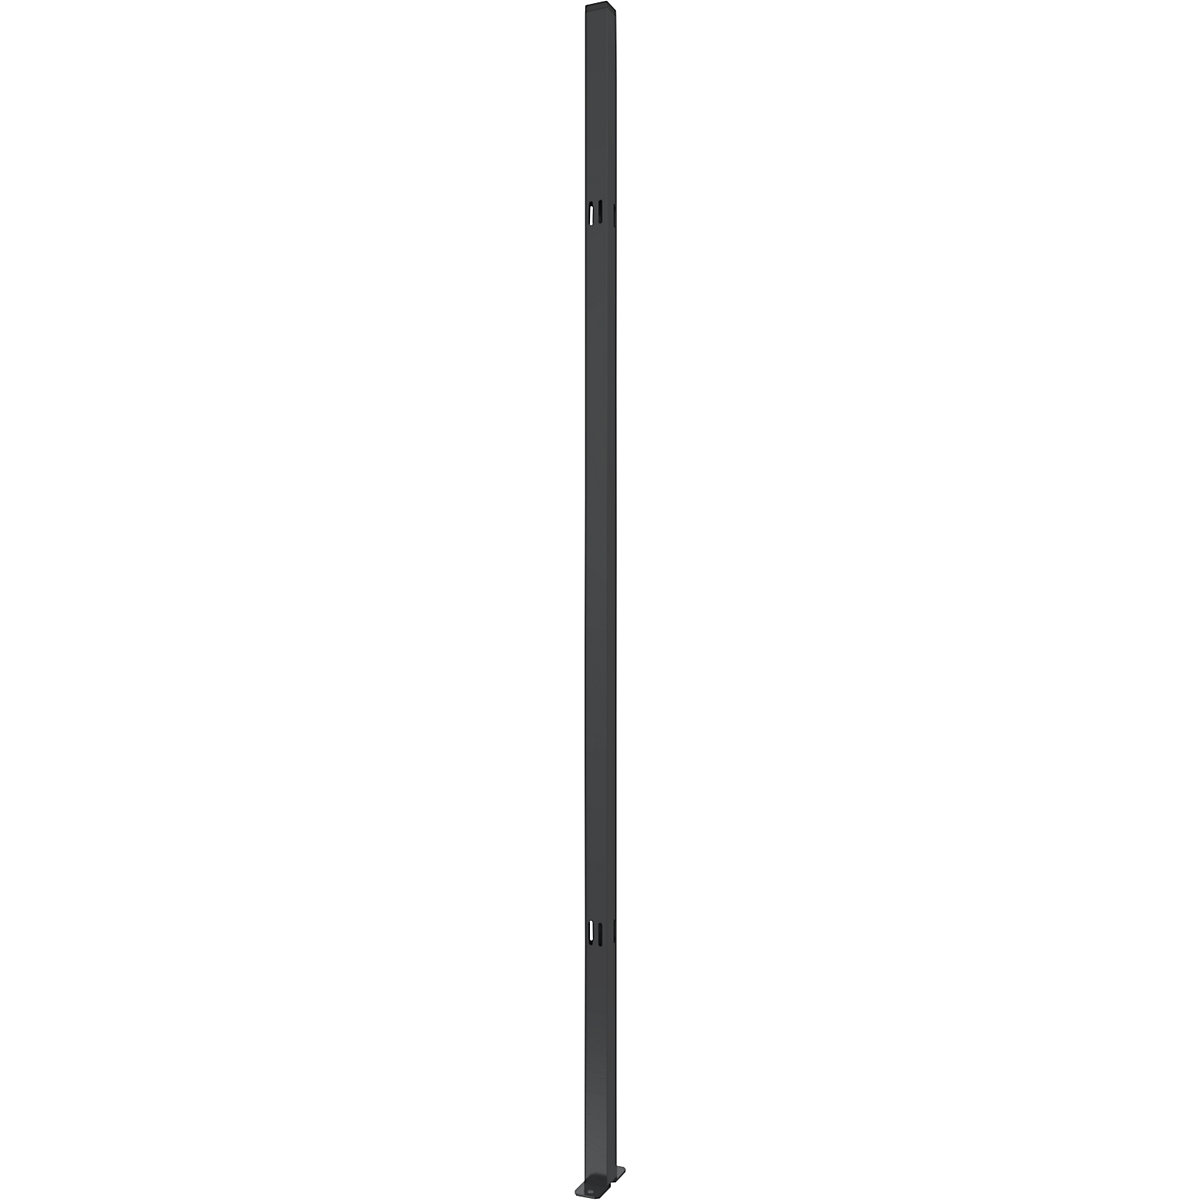 X-STORE 2.0 upright – Axelent